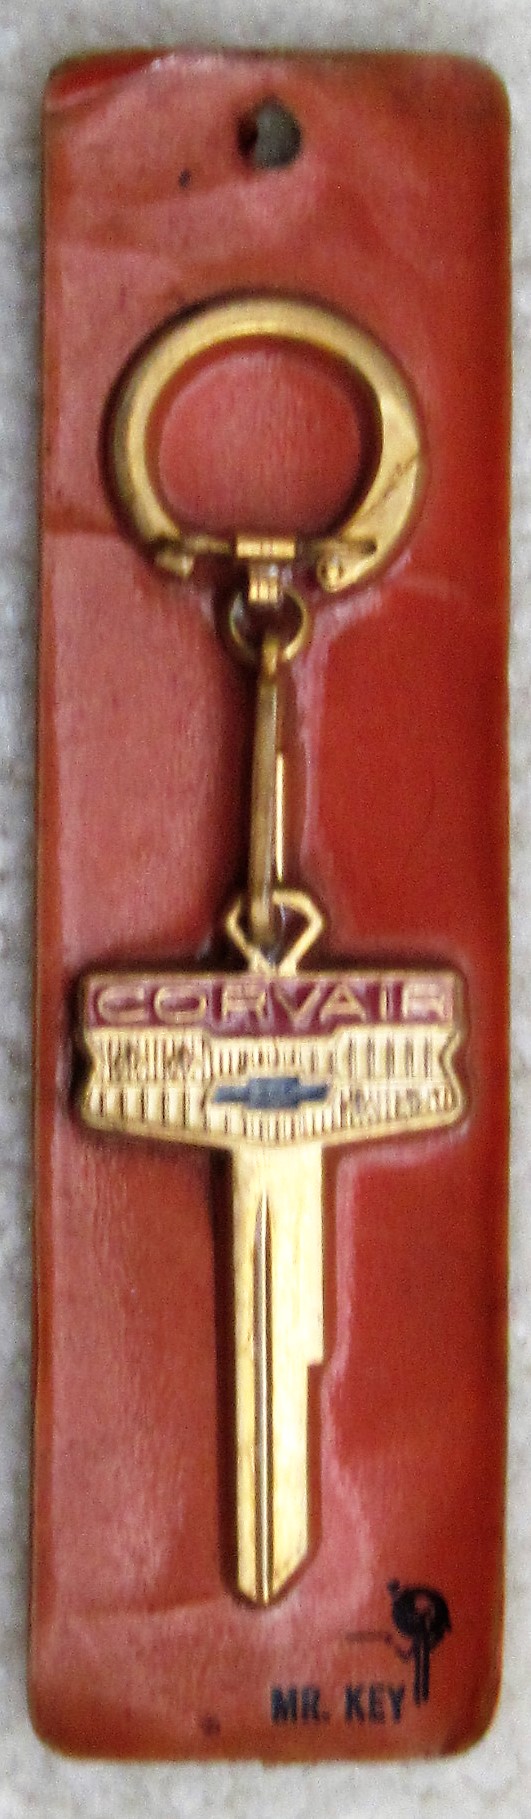 Chevy Corvair Crest Key - Bowtie